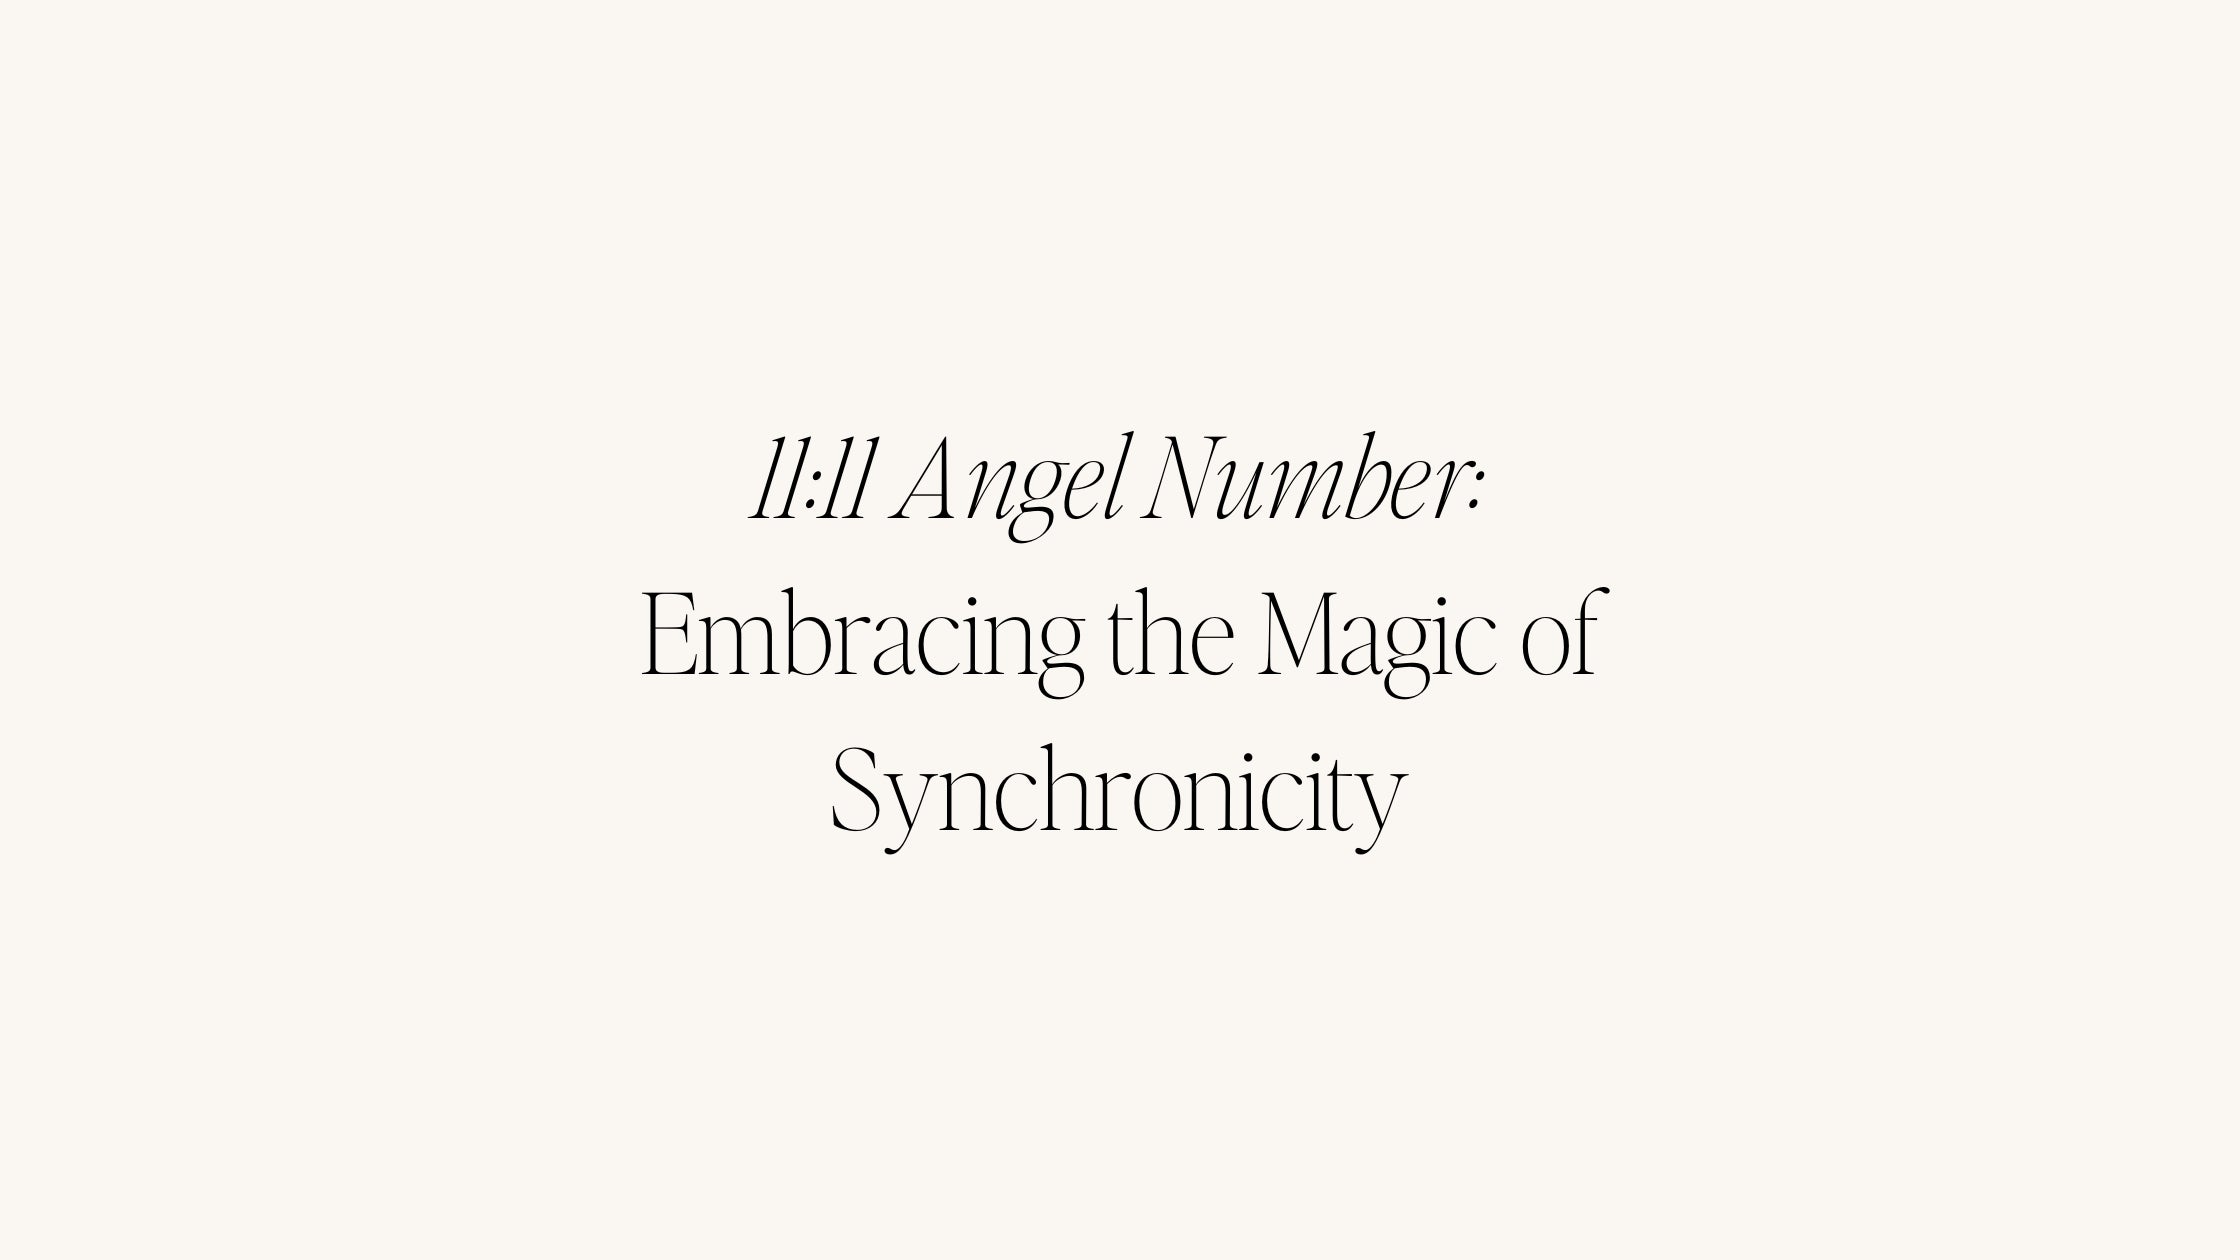 Embracing the Magic of Synchronicity: The Mystical Meaning of the 11:11 Angel Number